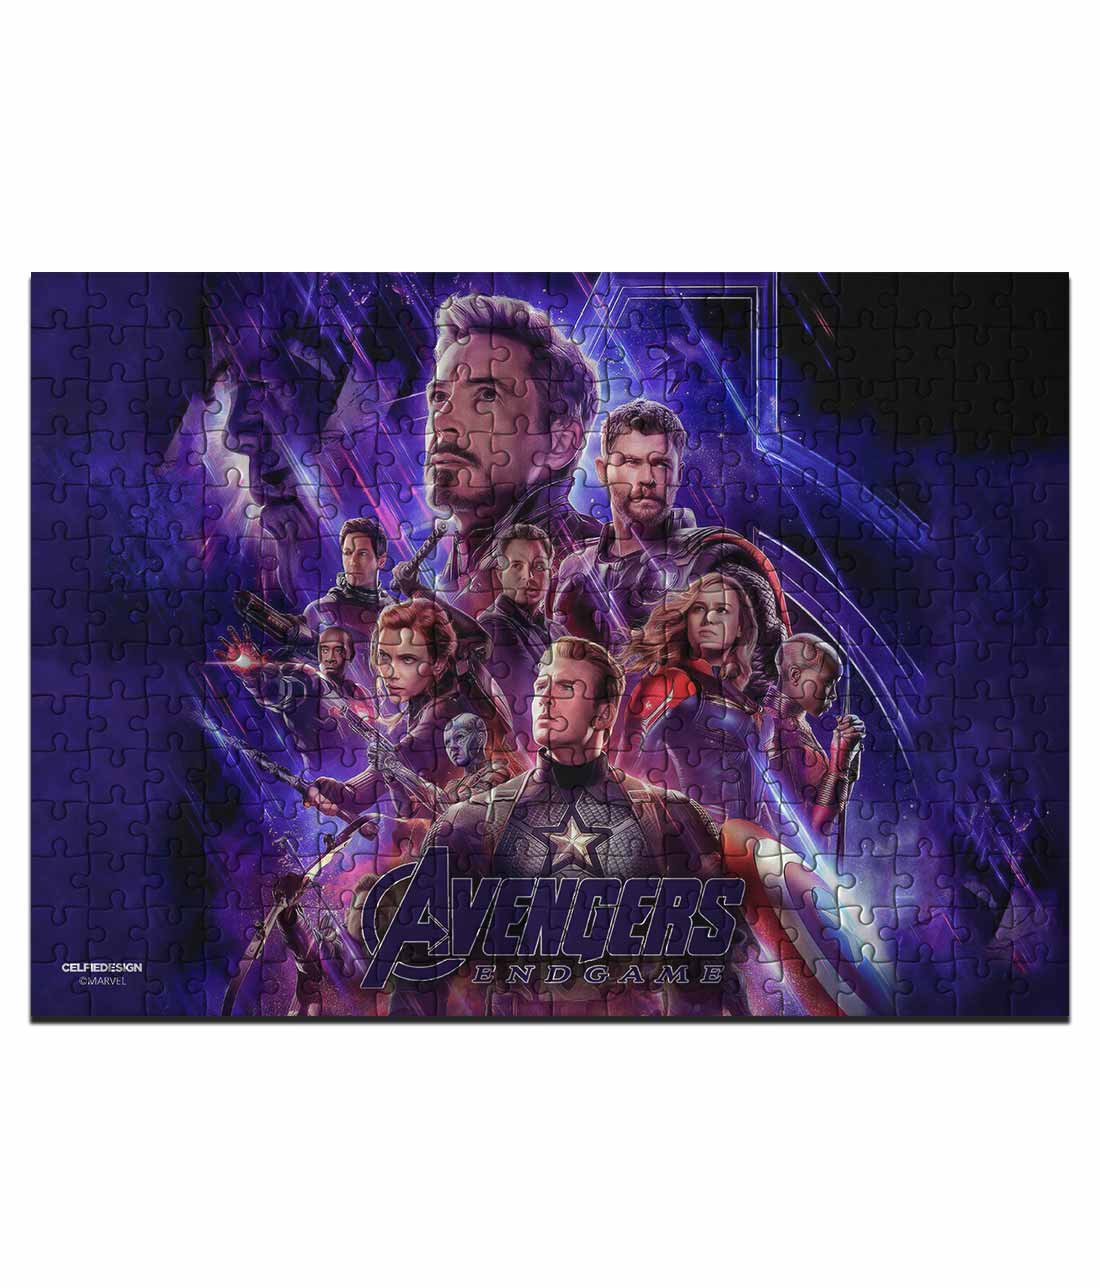 Buy Avengers Endgame Poster - Magnetic Puzzles Puzzles Online